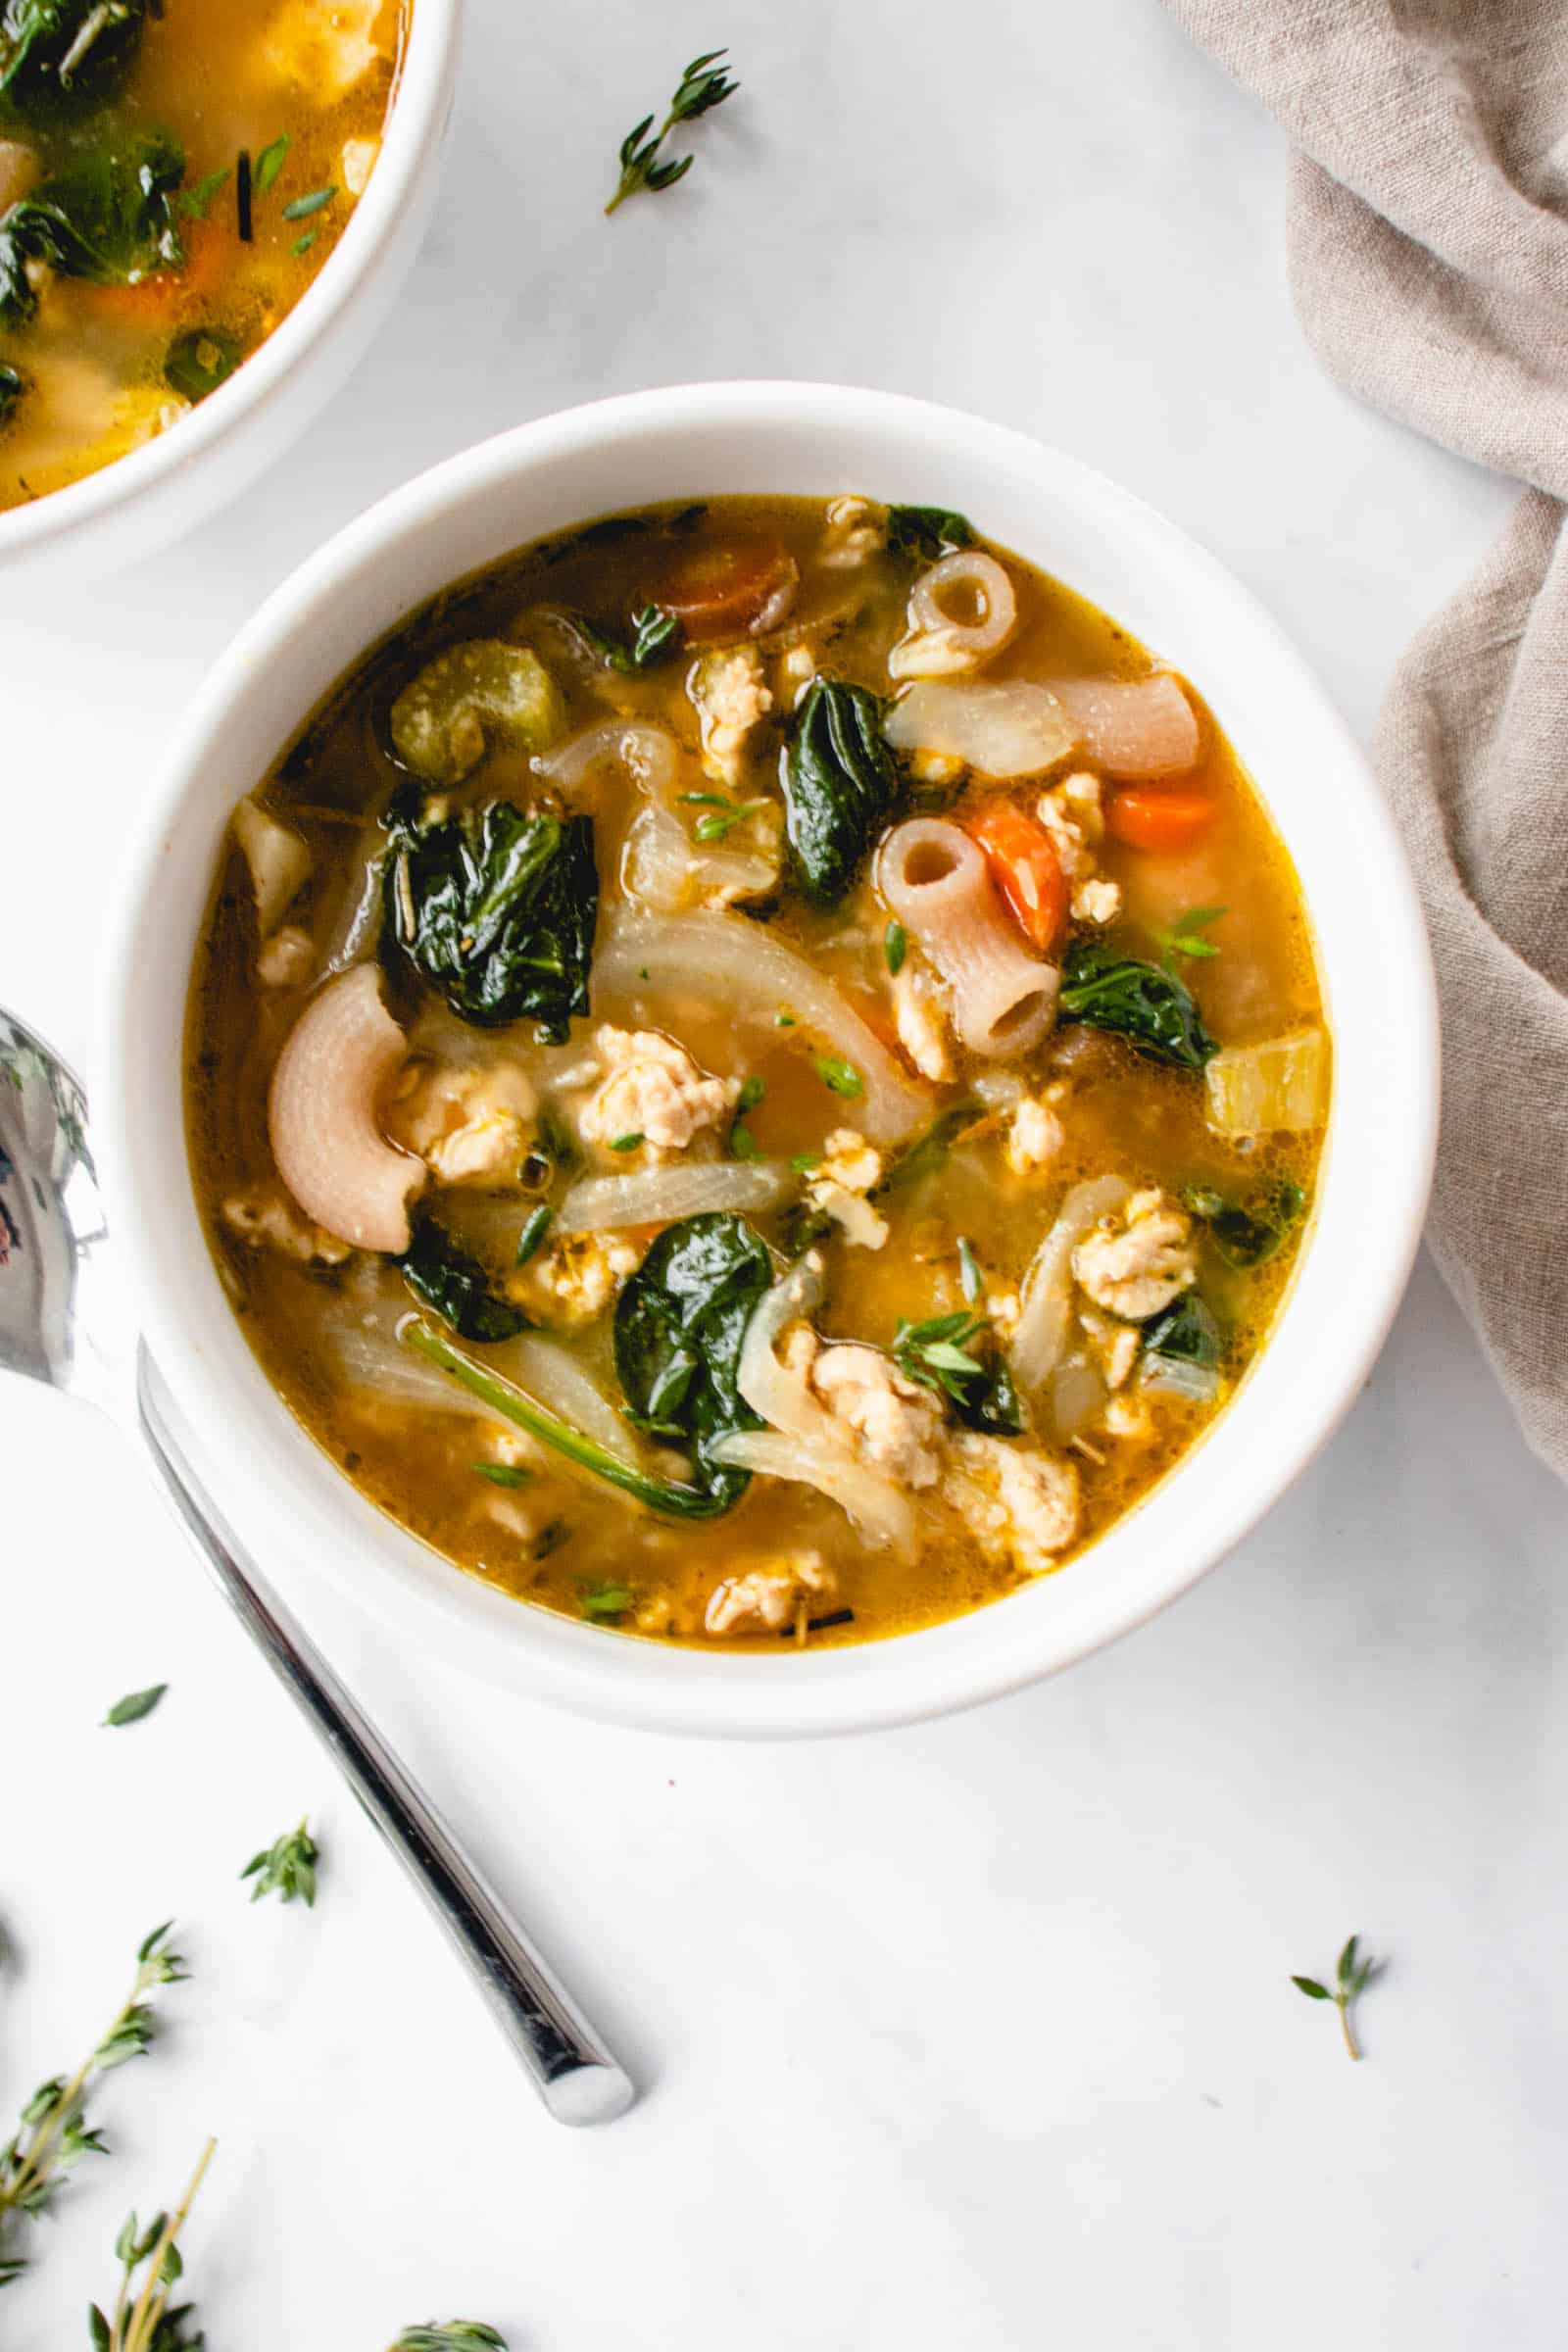 https://healmedelicious.com/wp-content/uploads/2022/01/Hearty-Ground-Turkey-Soup-with-Vegetables-and-Pasta-8.jpg